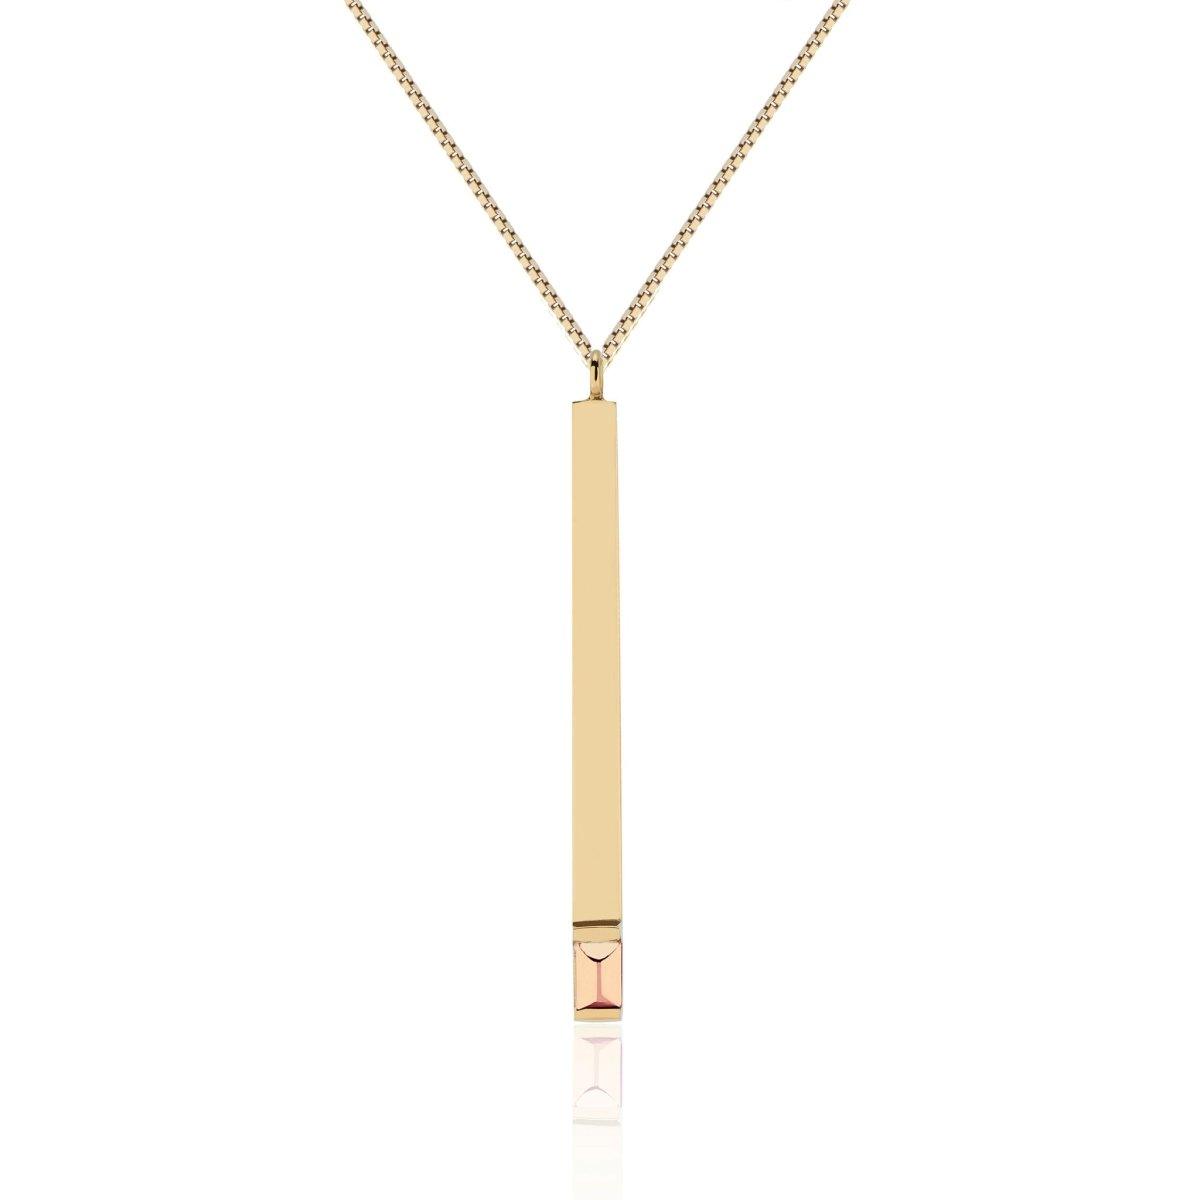 Spark The Fire Matchstick Pendant - Nataly Aponte